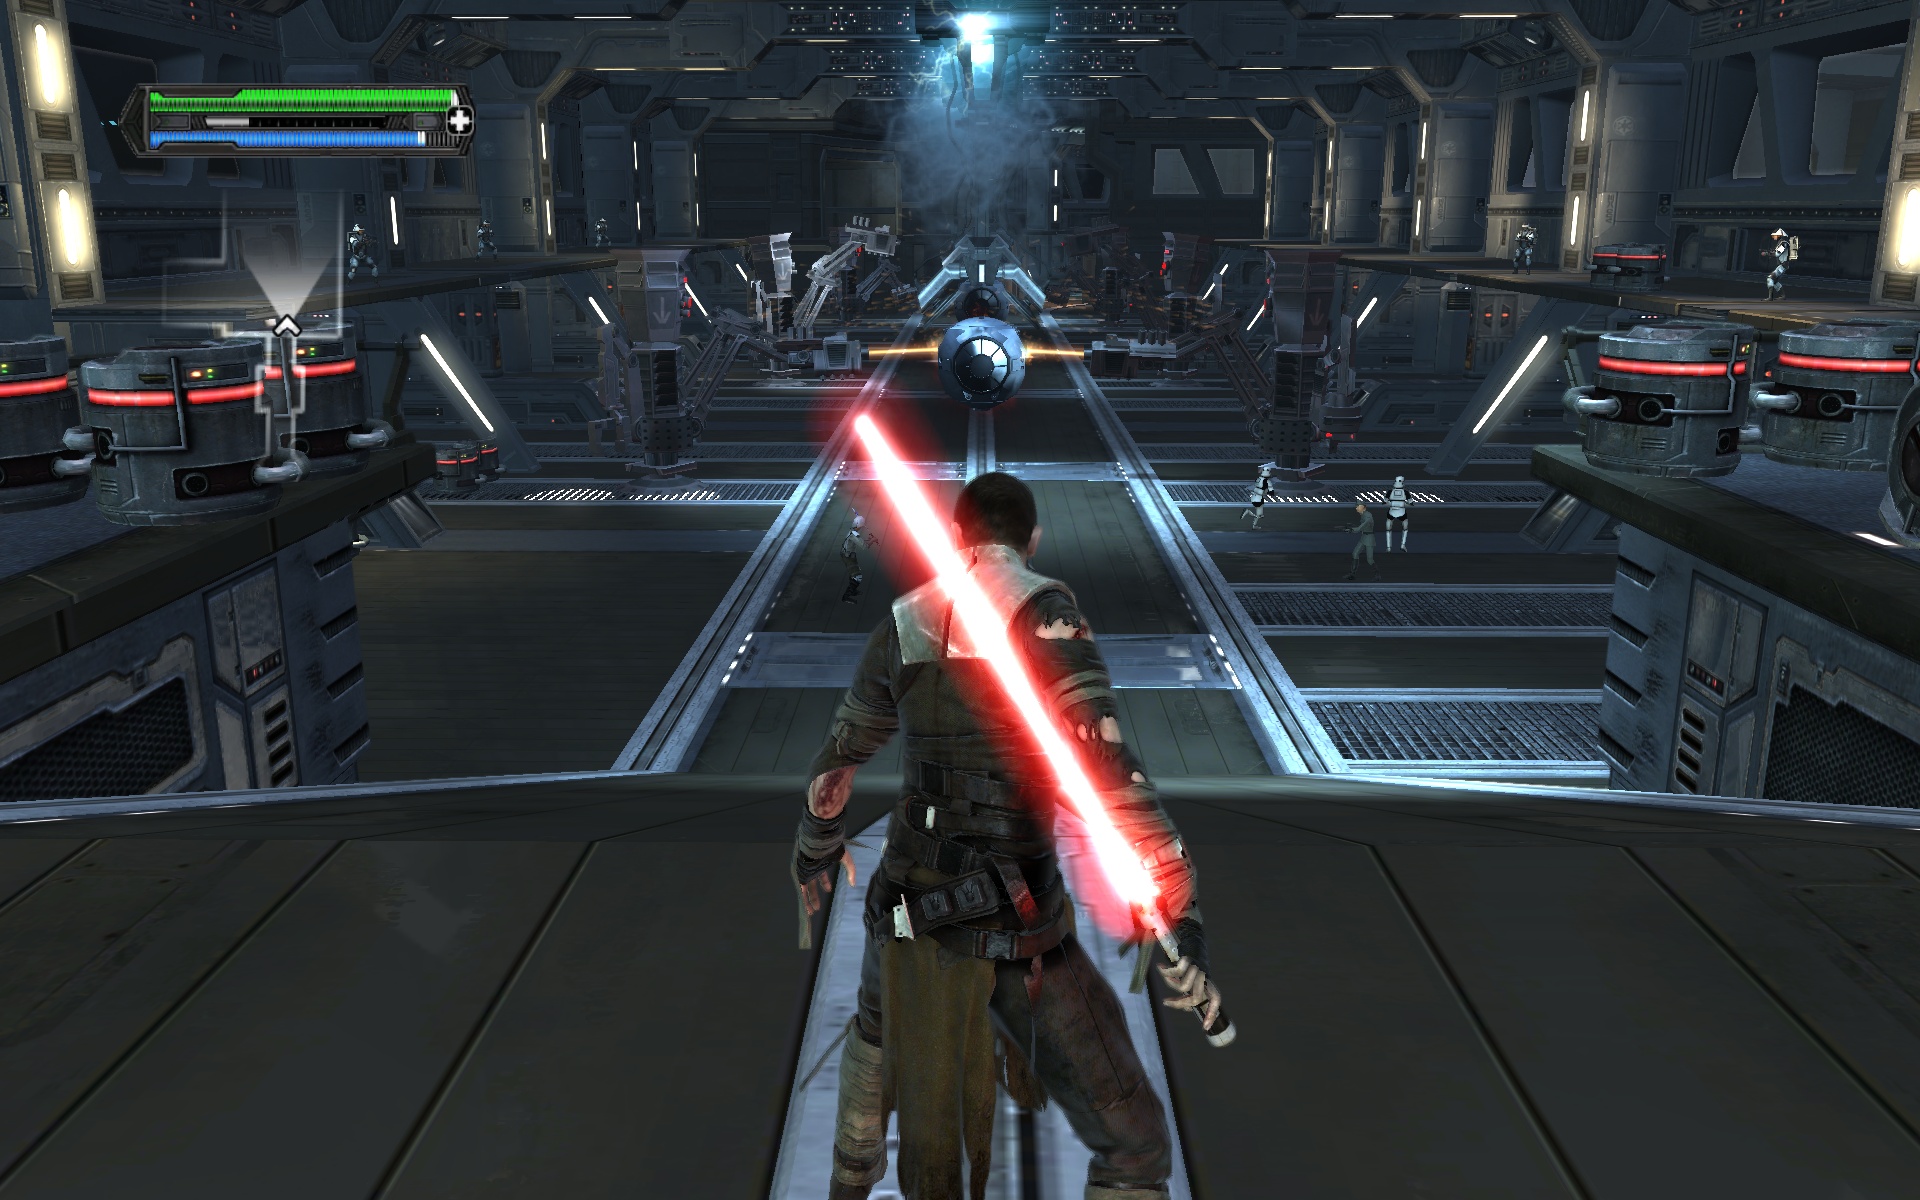 Сила стар игра. Star Wars: the Force unleashed - Ultimate Sith Edition. Star Wars the Force unleashed ситх. Star Wars the Force unleashed Ранкор. Форс Анлишд ранкоры.